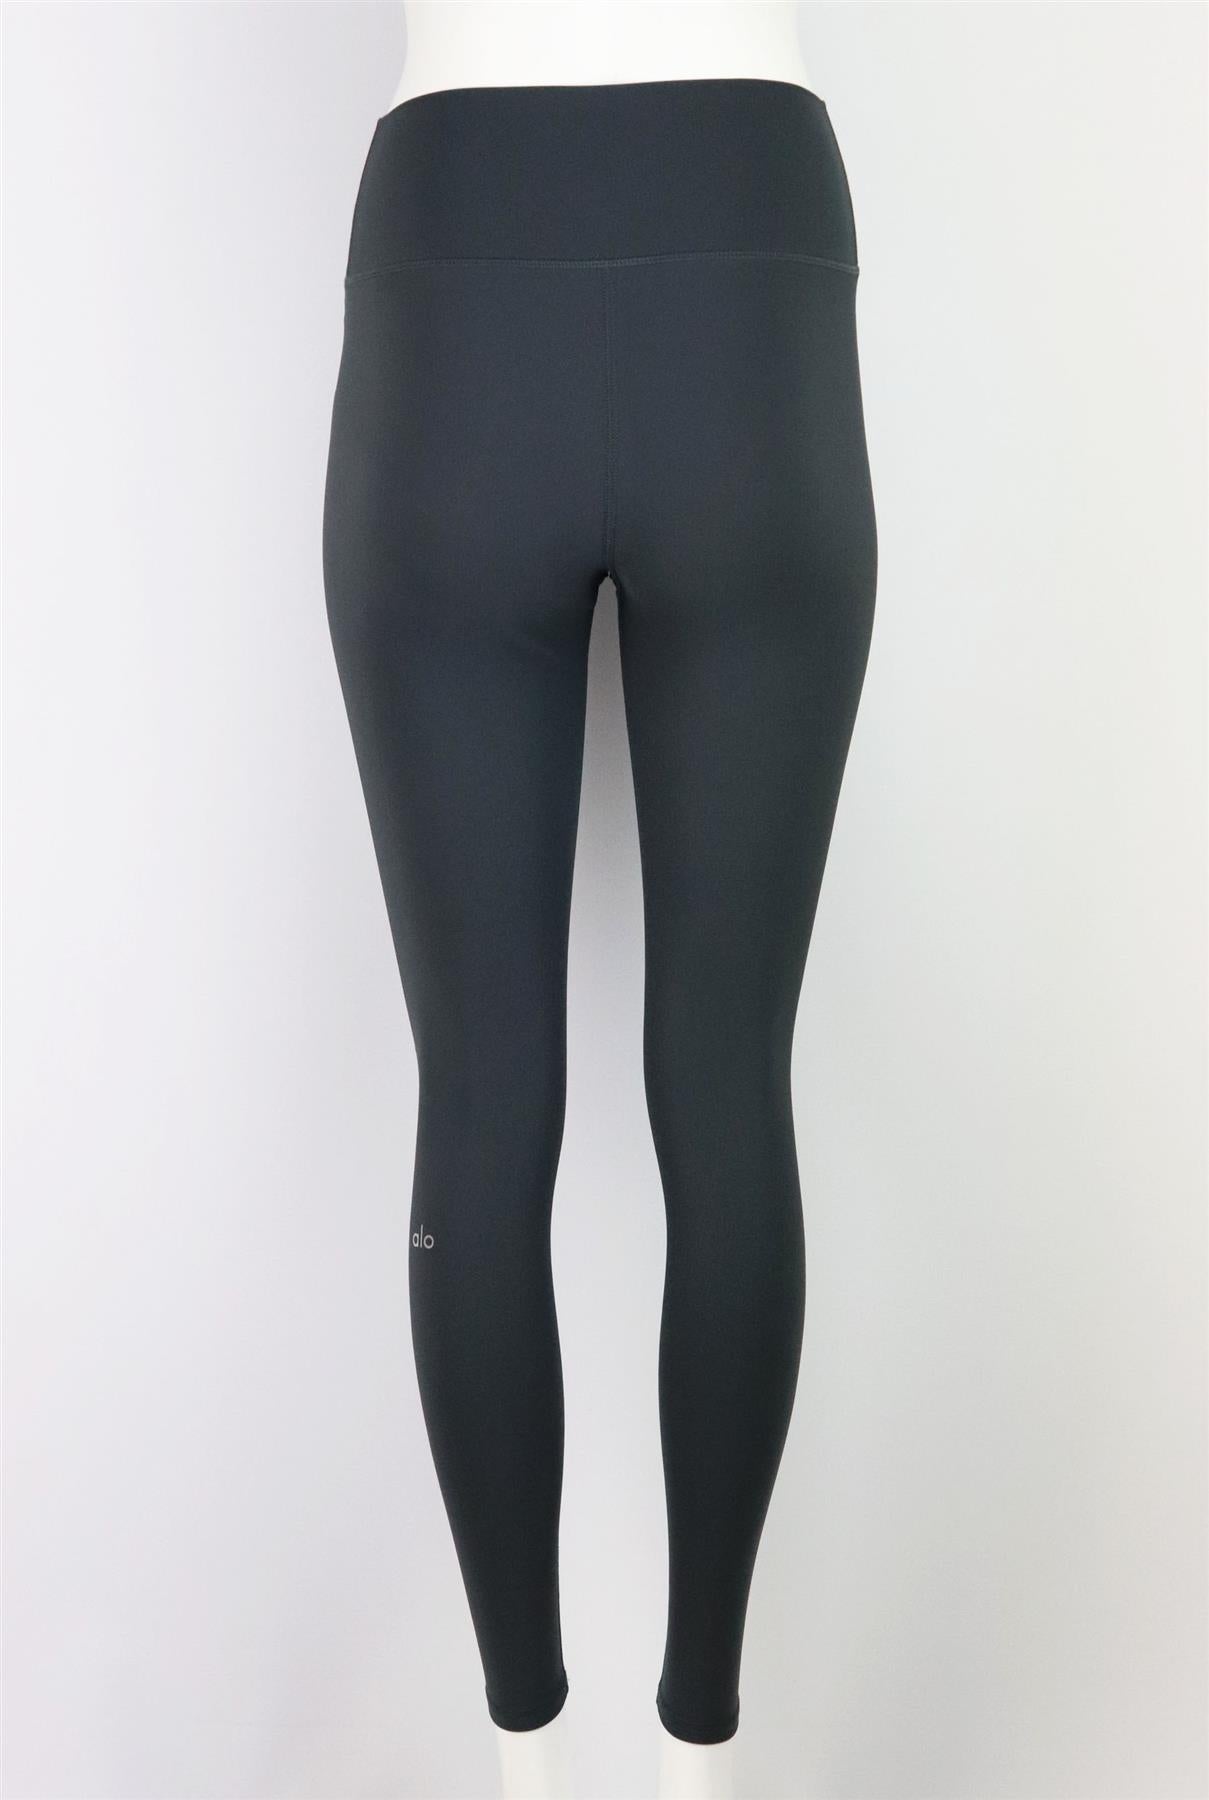 Alo Yoga Ripped Warrior Leggings in Alloy Size Small Silver - $48 - From  Allyson